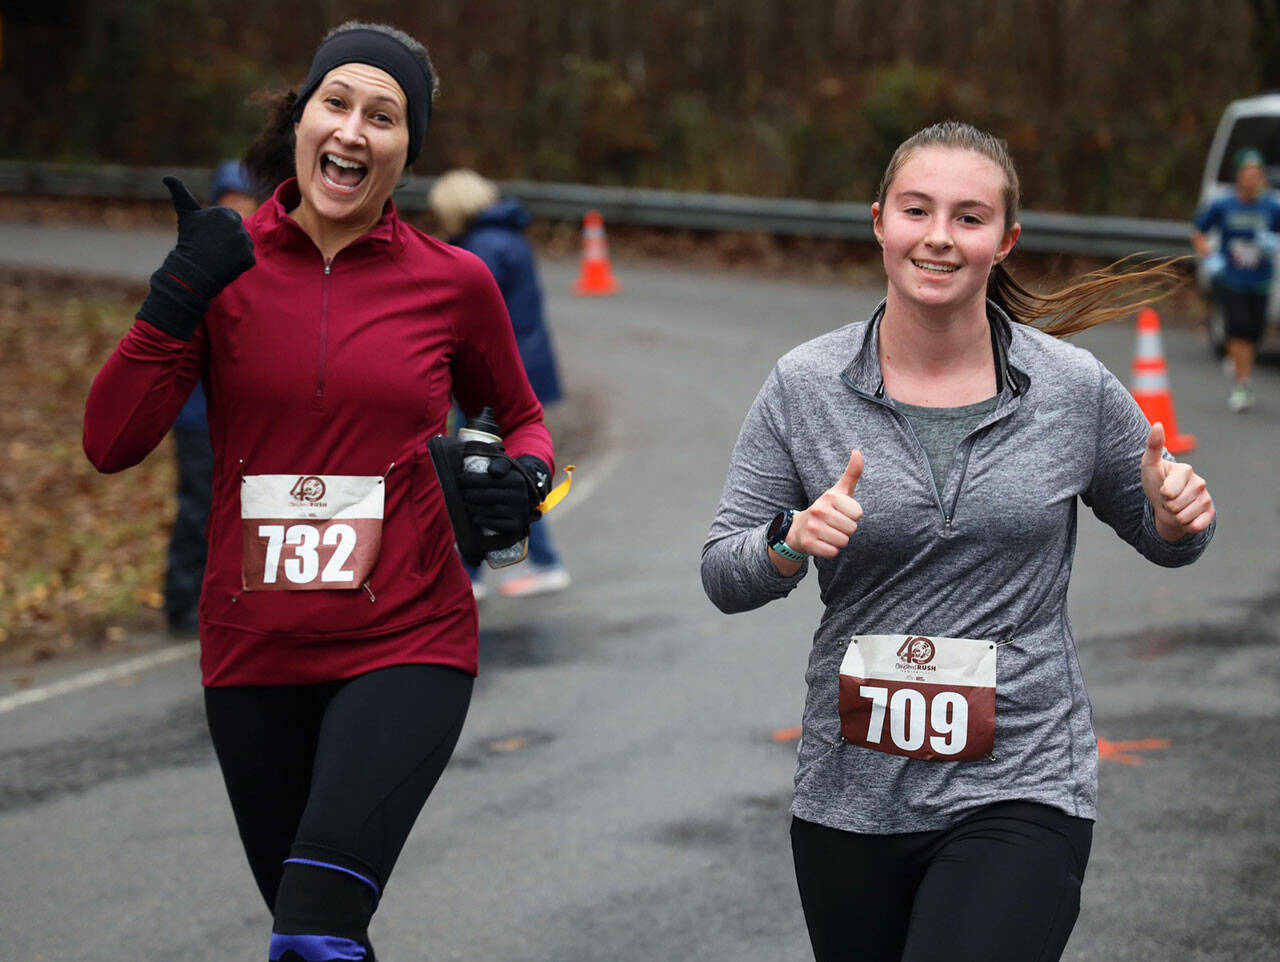 COURTESY PHOTO, City of Kent
Christine Deacon, left, of Covington, and Katie Blauvelt, of Renton, participate in the Christmas Rush run/walk on Dec. 10 in Kent.